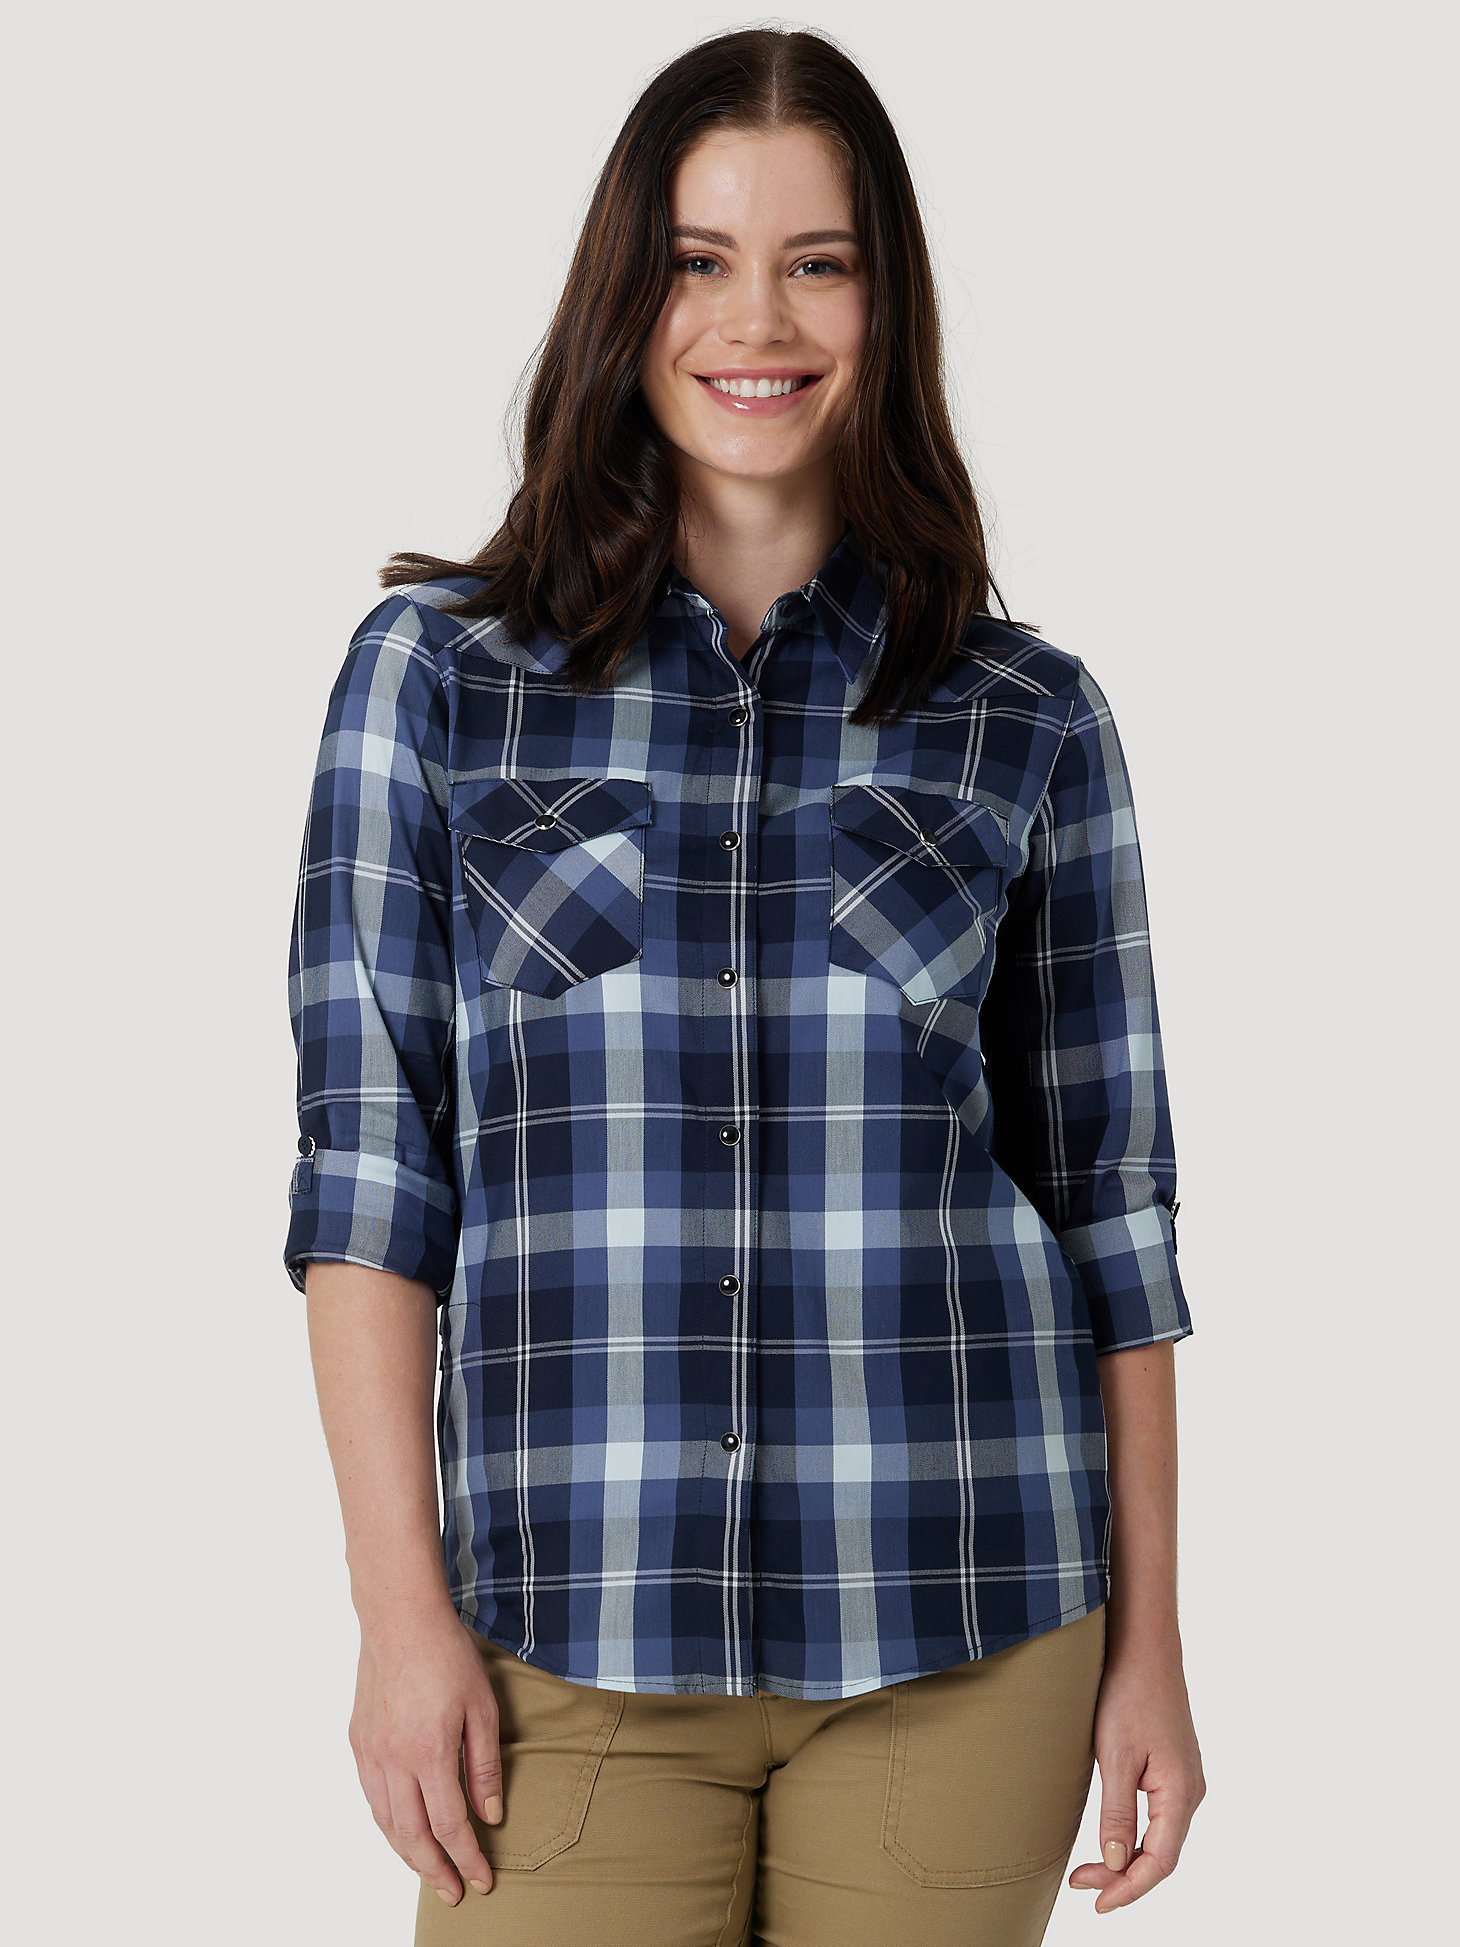 ATG By Wrangler™ Women's Plaid Mixed Material Shirt in Dusty Miller Flower main view